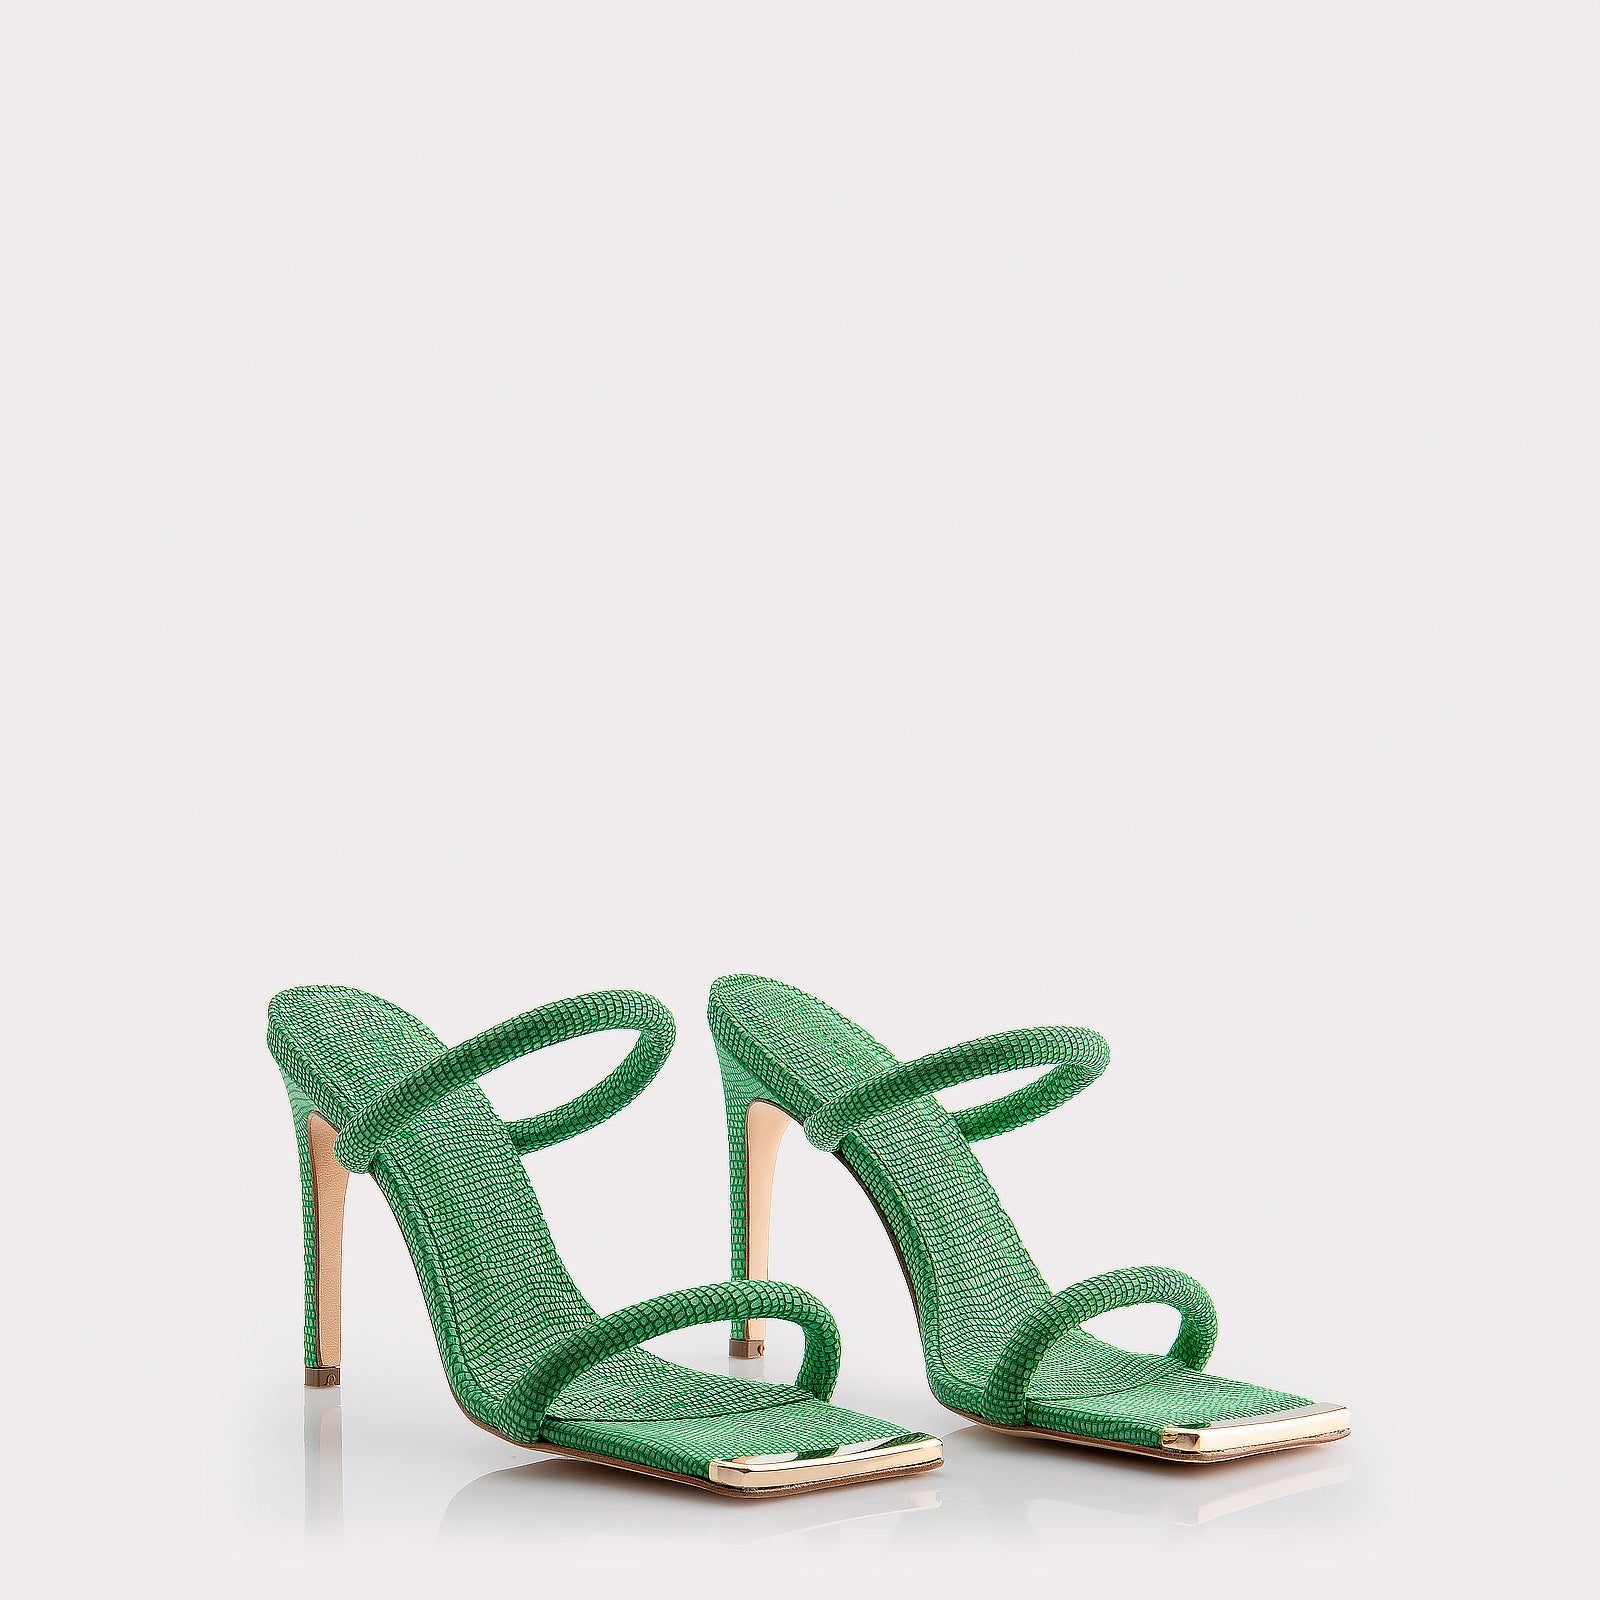 KATERINA GREEN LIZZARD EMBOSSED SUEDE LEATHER MULES